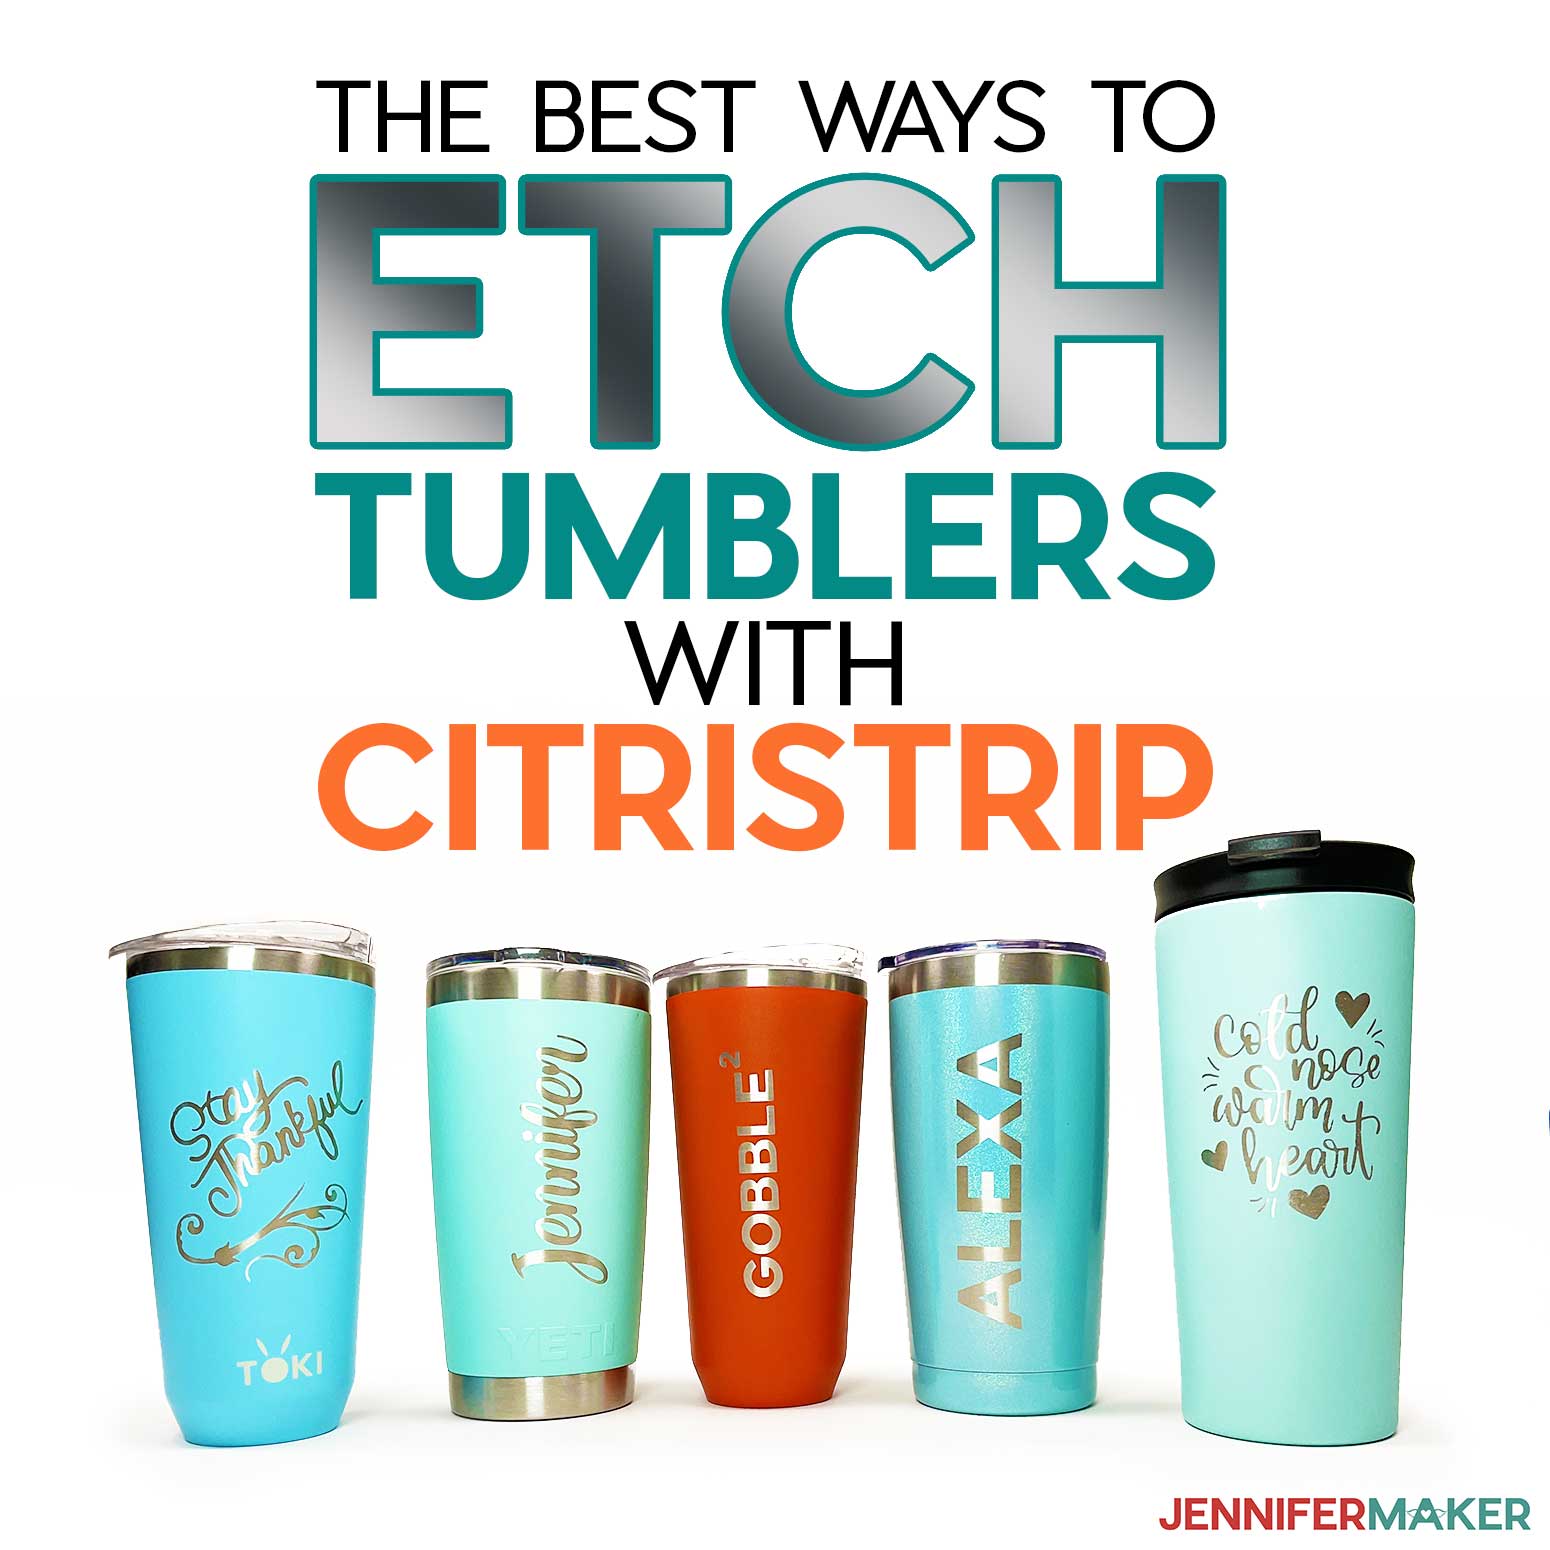 Etch Tumblers with Citristrip Easily and Safely – Two Ways to Success!